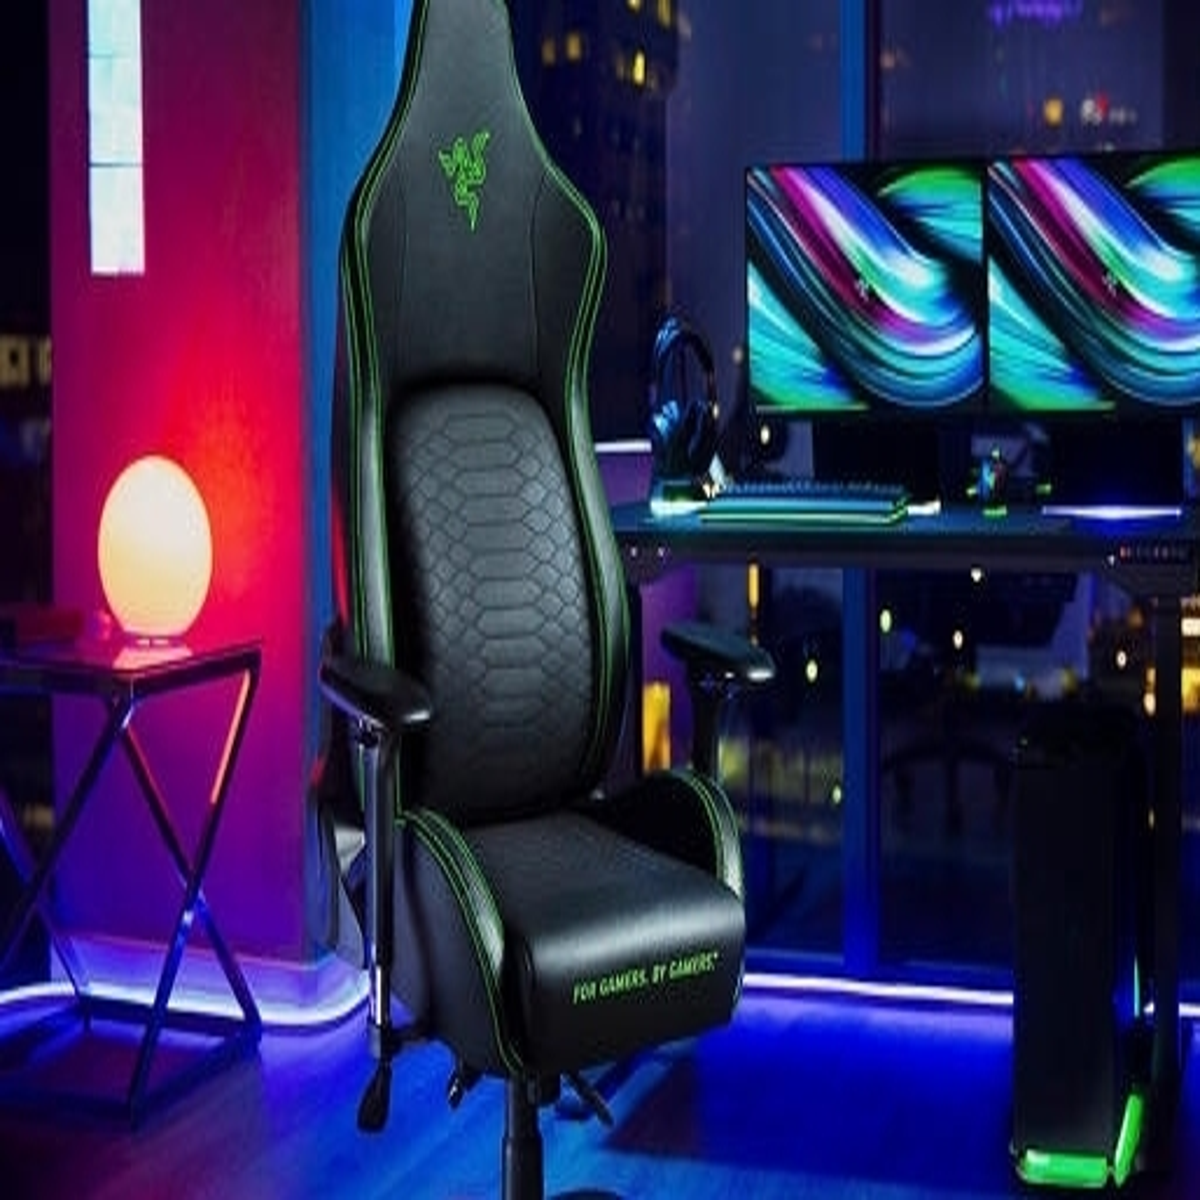 is chair on The gaming this Iskur Razer $350 for Black offer Friday